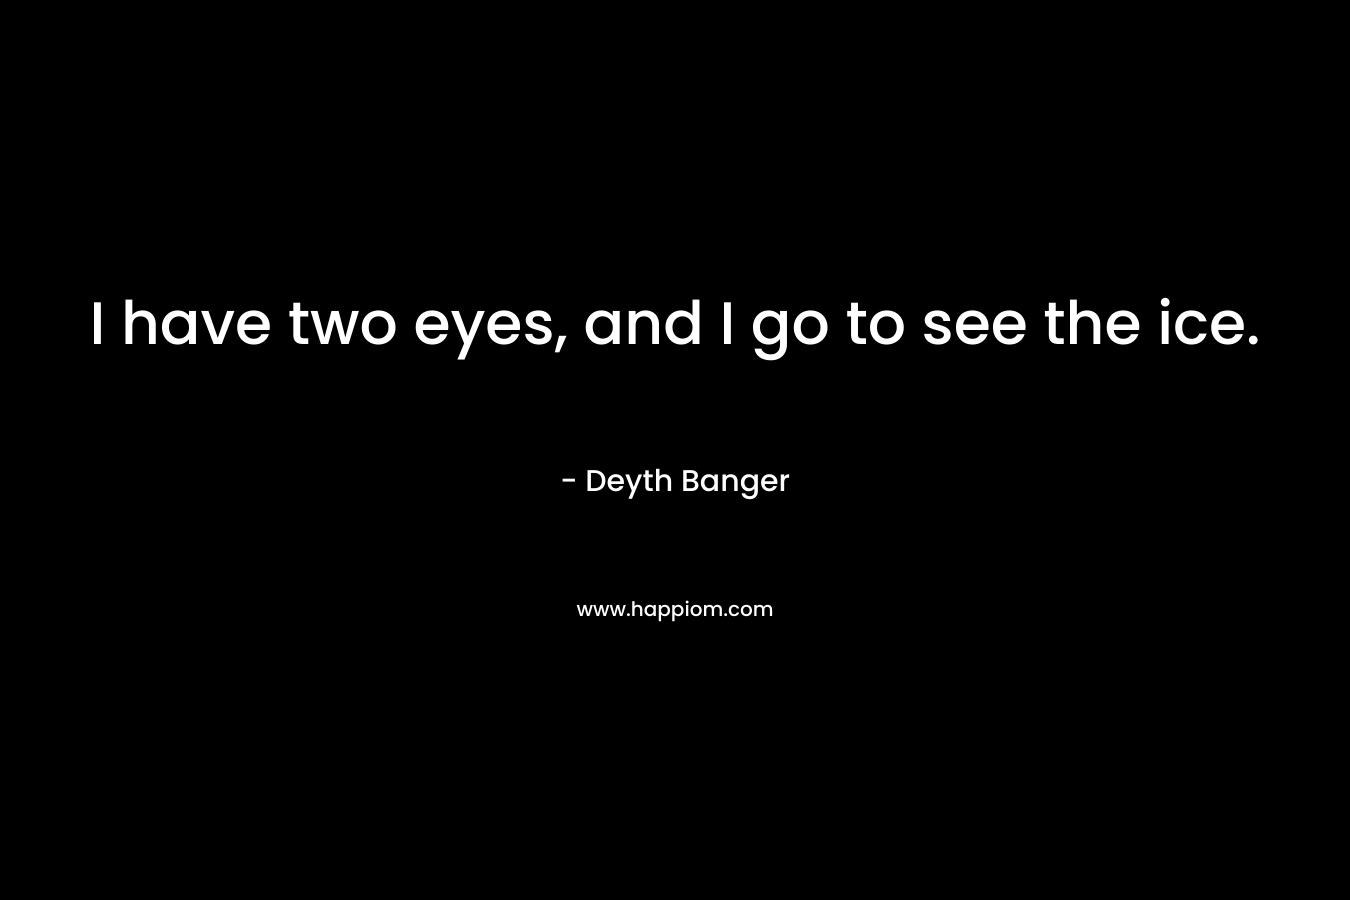 I have two eyes, and I go to see the ice. – Deyth Banger